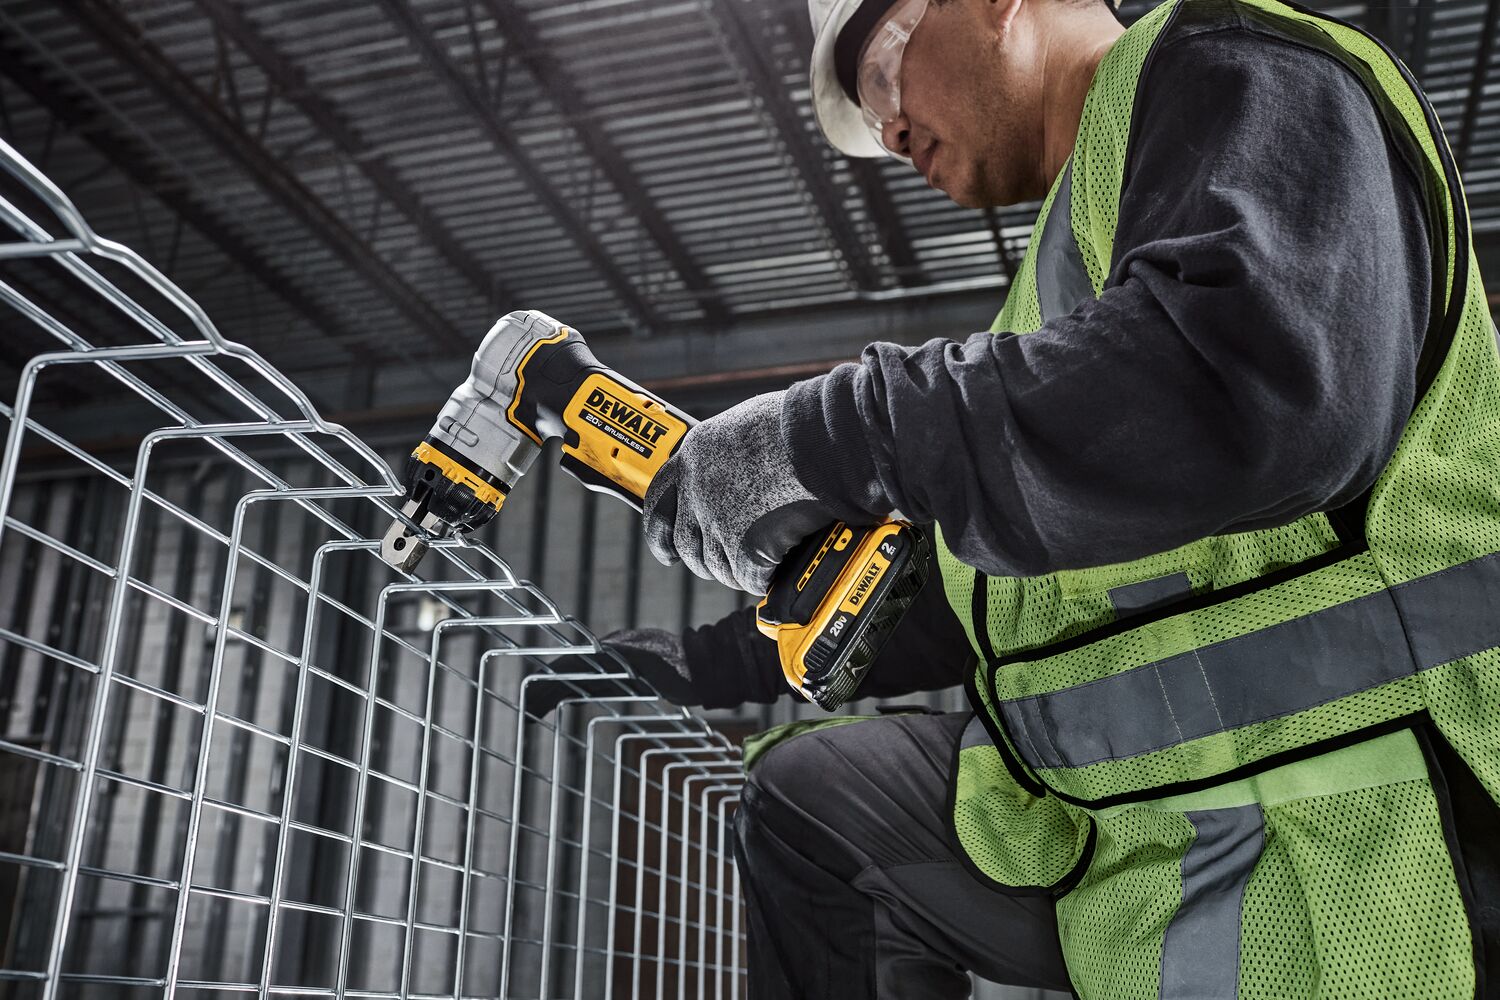 DEWALT Cable Tray Cutter is used by a kneeling tradesman to cut basket tray in a data center.